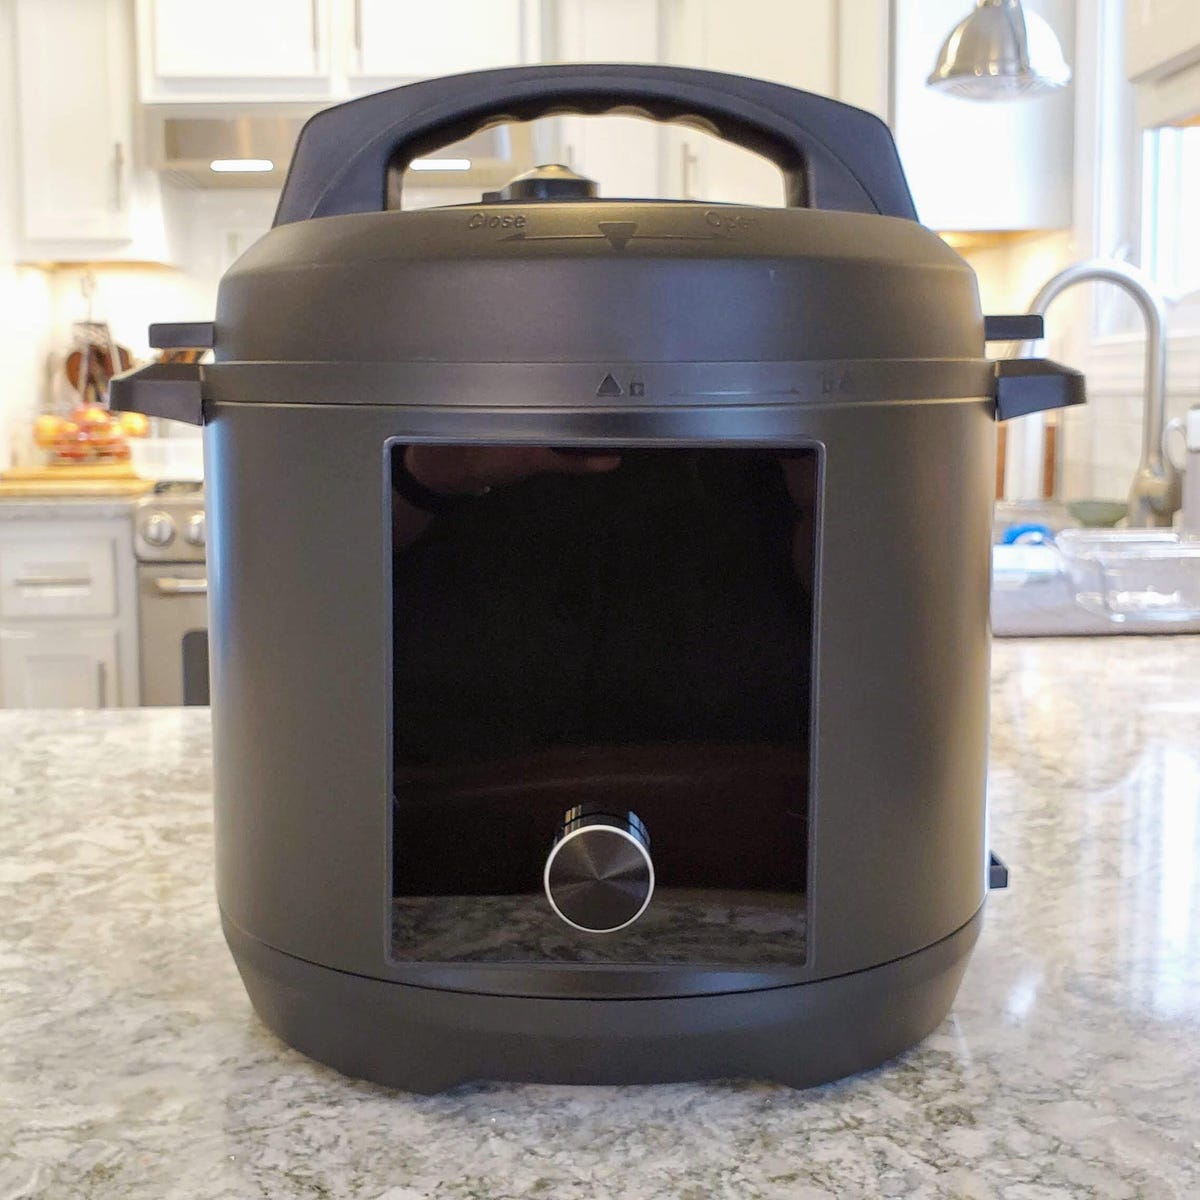 Why my favorite multicooker isn't an Instant Pot - CNET